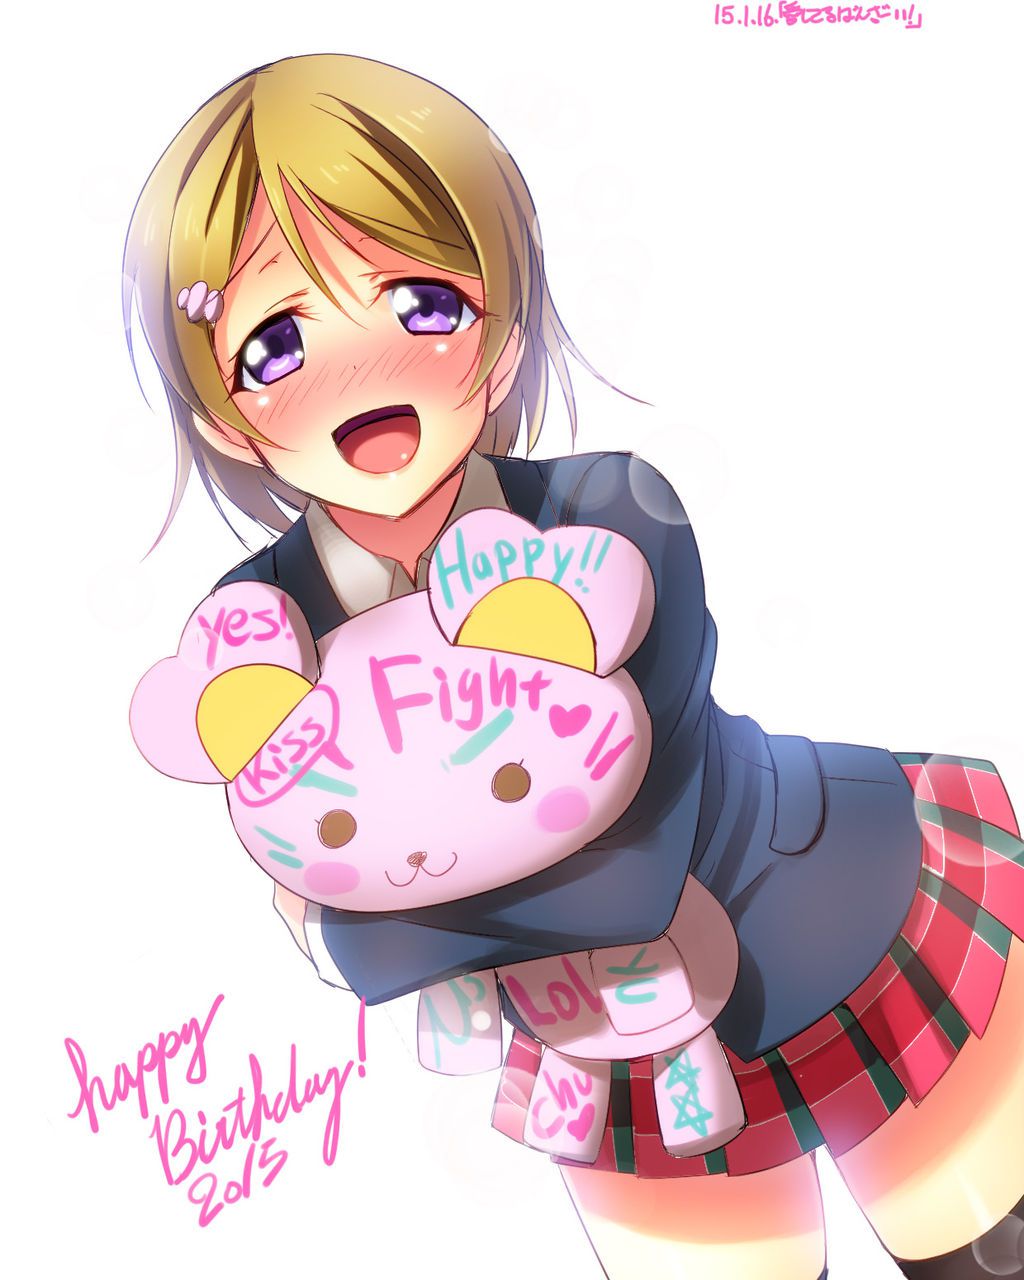 Pee on the Love Live! Erotic moe image of the Love live performers [2d] 50